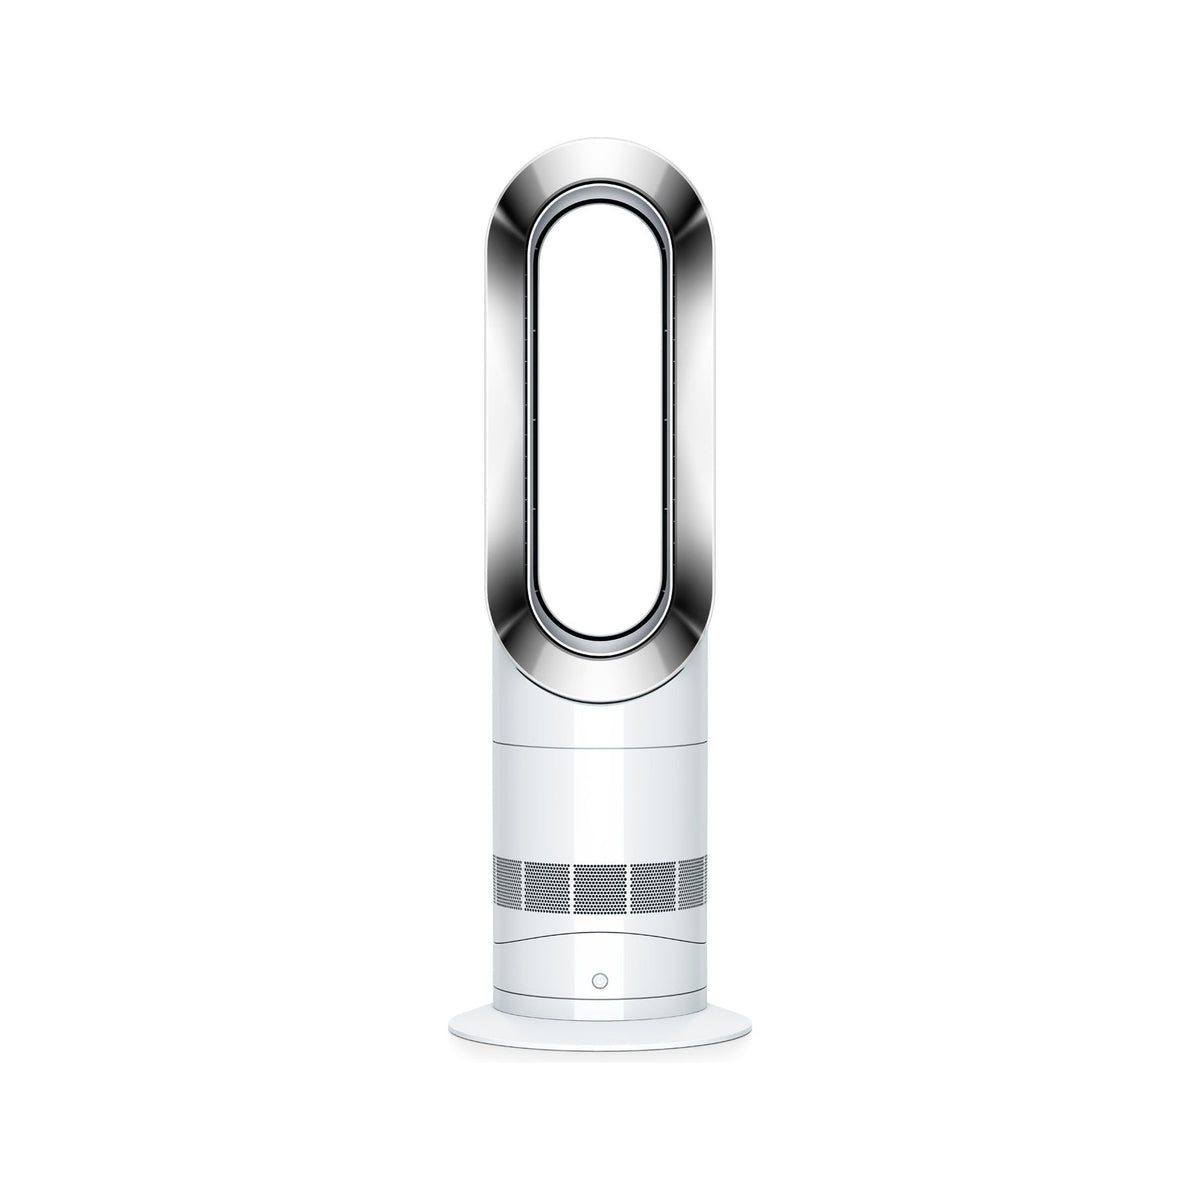 Dyson Hot + Cool Jet Focus Purifying Desk Fan Heater - White &amp; Silver | AM09 from Dyson - DID Electrical